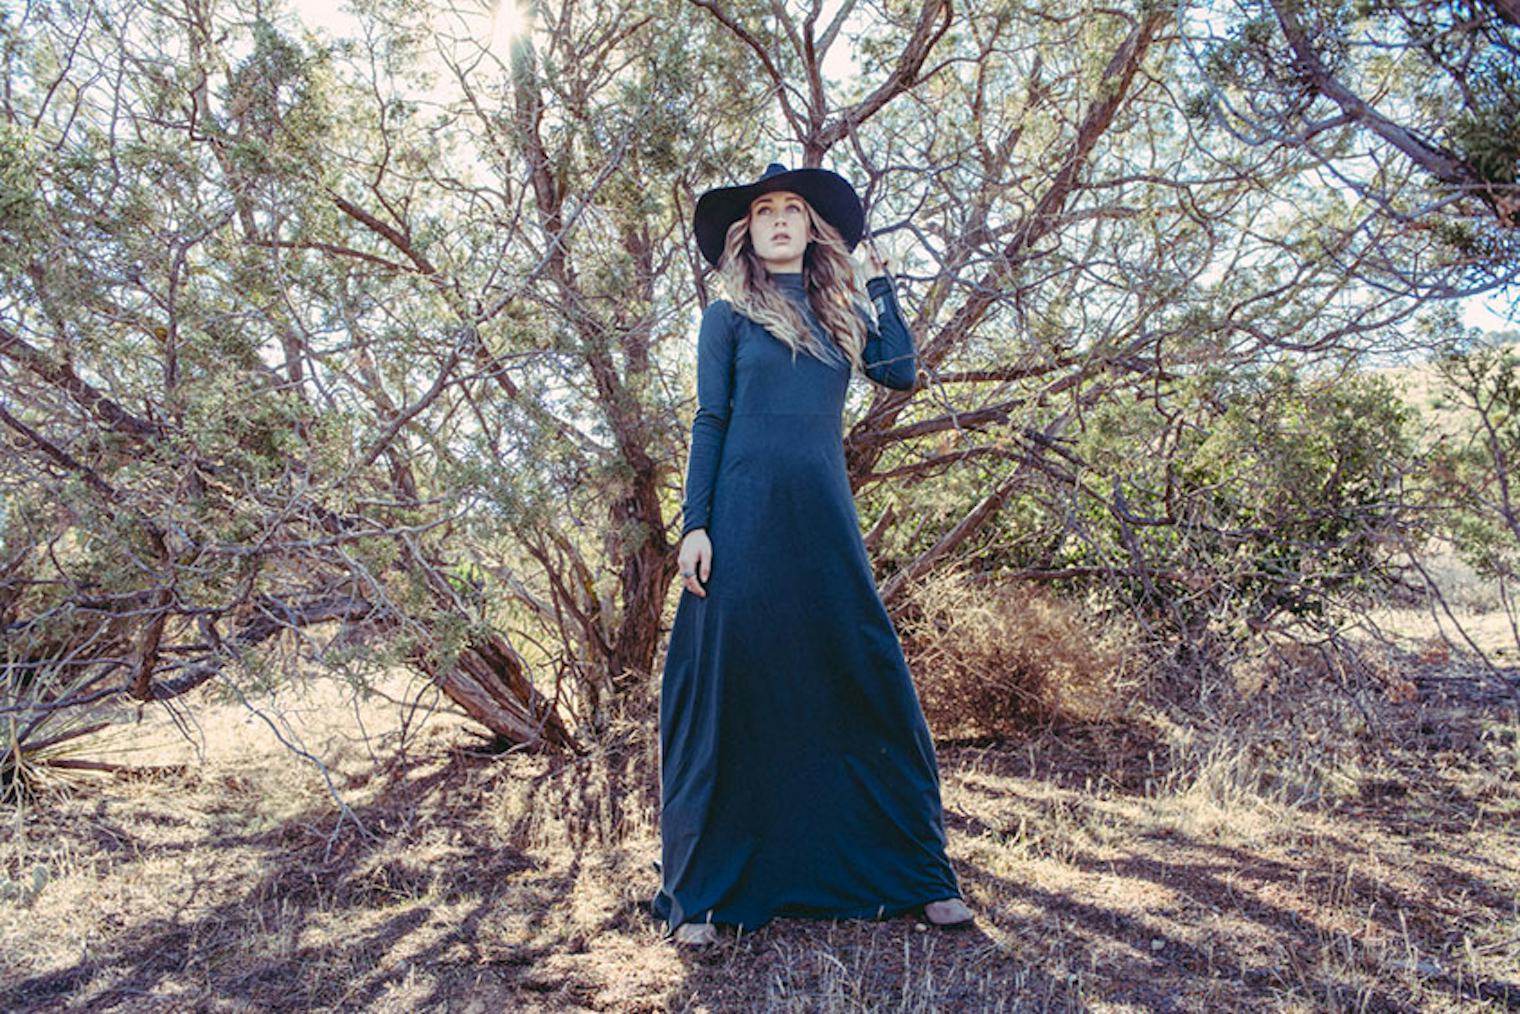 Premiere: Zella Day’s Free People Documentary